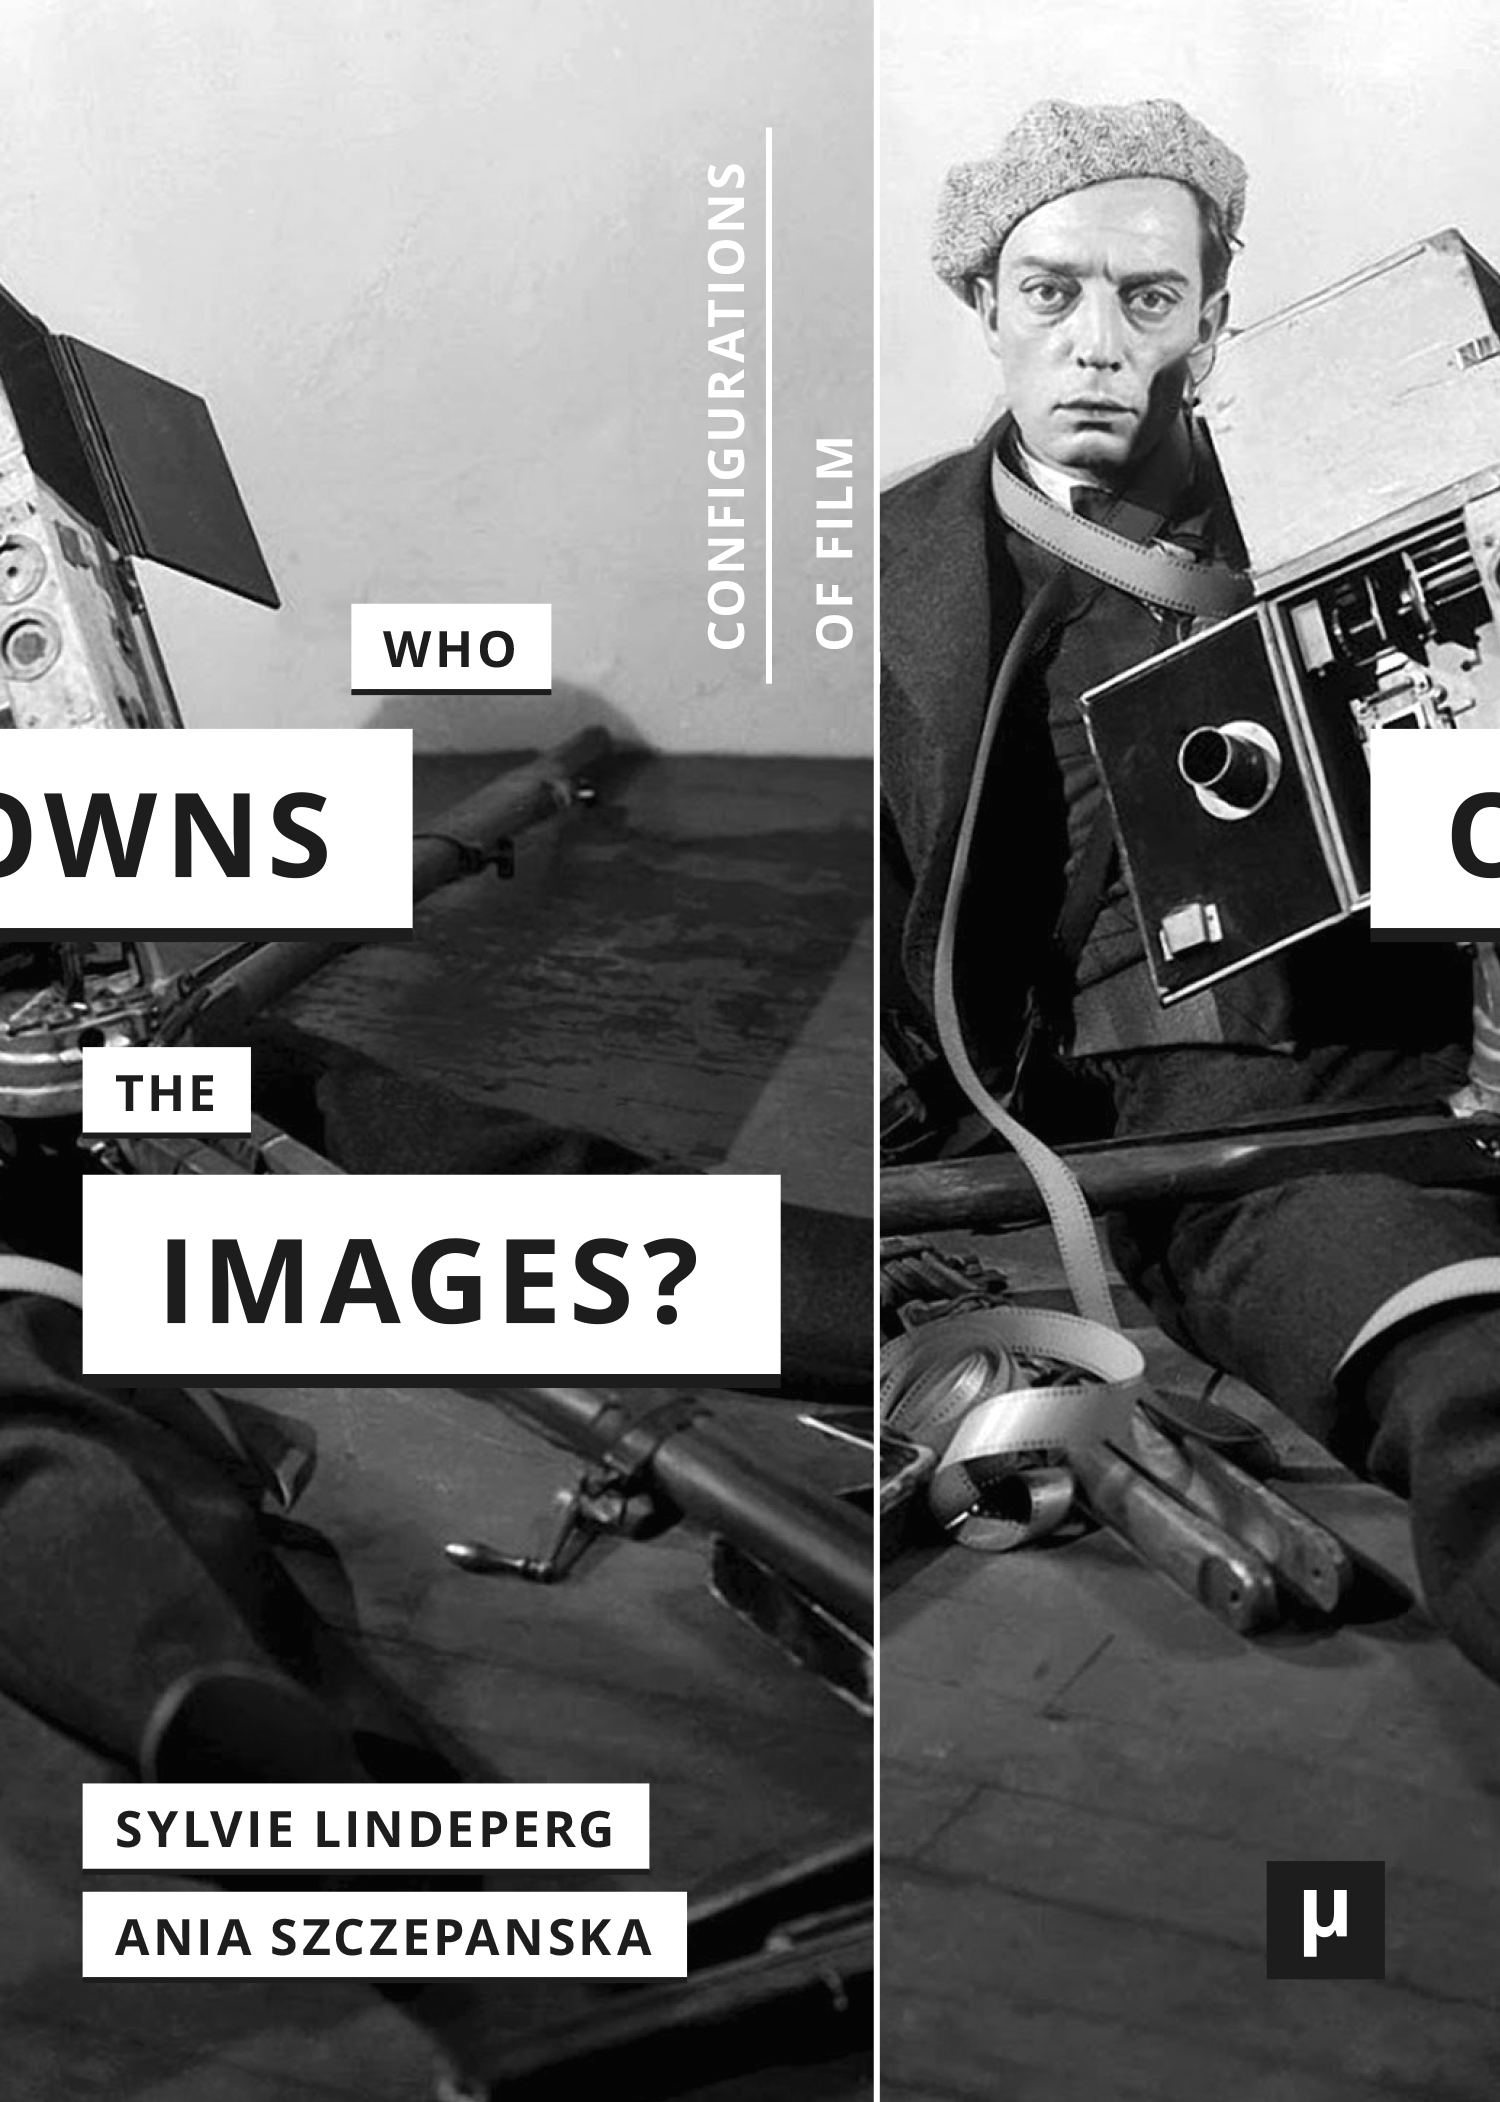 Cover: Who owns the images?